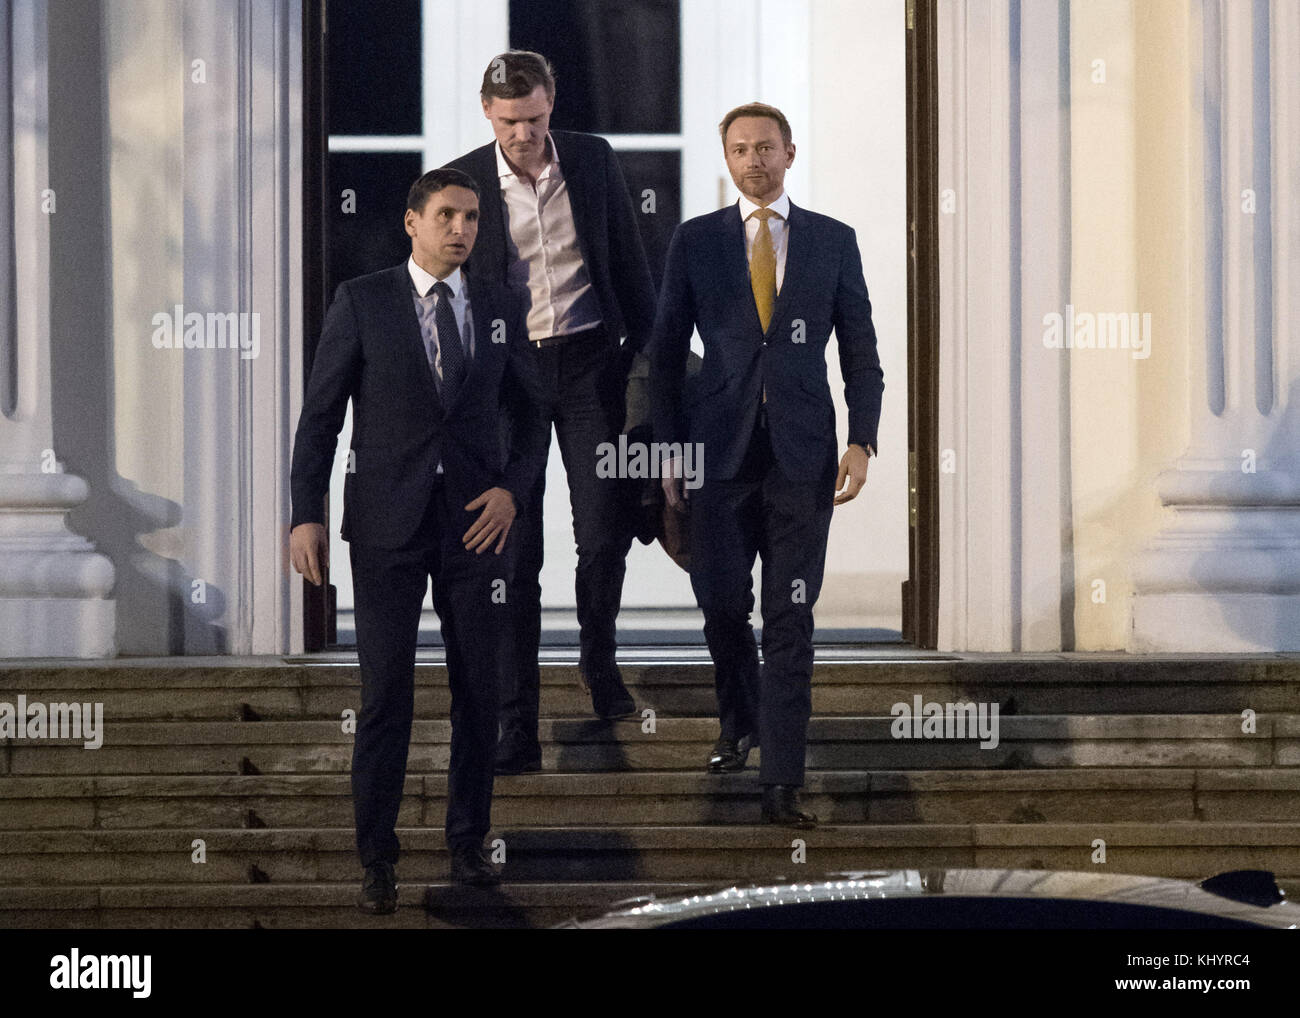 Berlin, Germany. 21st Nov, 2017. Christian Lindner, leader of the Free Democratic Party of Germany (FDP, R), leaves the Bellevue Palace after a meeting with German President Frank-Walter Steinmeier (Not Pictured) following the failure of the exploratory talks pursuing negotiations to form a cabinet under a so-called 'Jamaica' coalition of the CDU, CSU, FDP and the Greens parties, in Berlin, Germany, 21 November 2017. Credit: Bernd von Jutrczenka/dpa/Alamy Live News Stock Photo